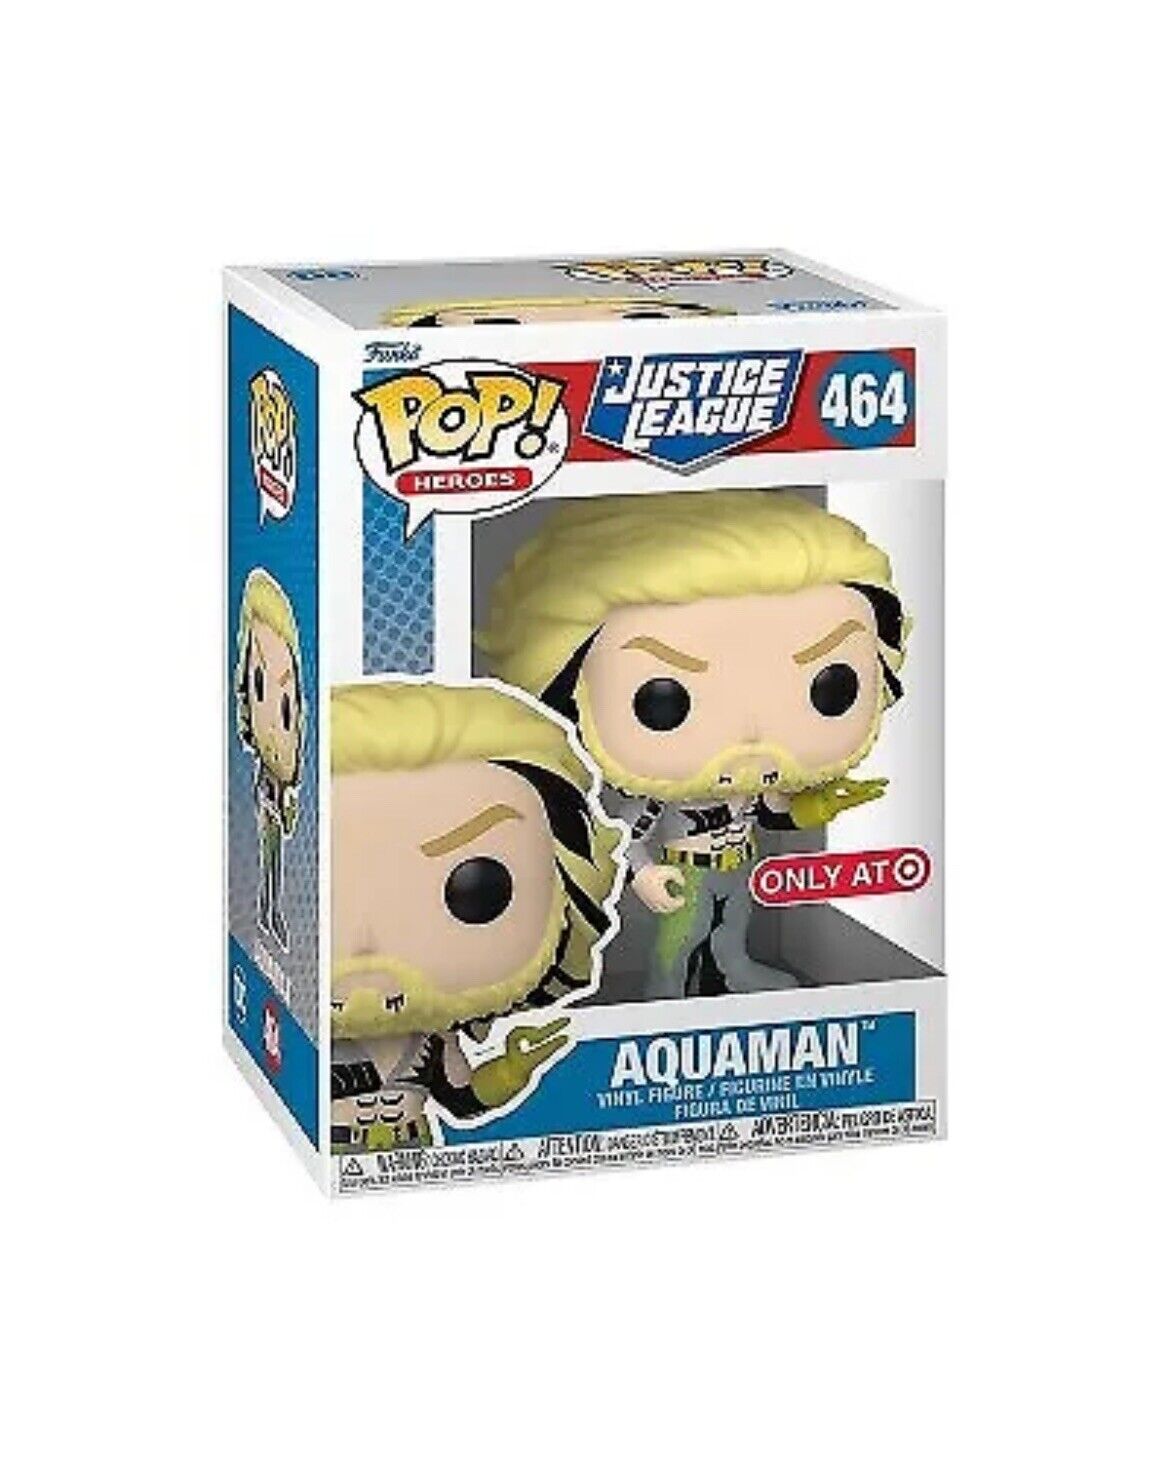 New In Box Funko POP Justice League Aquaman #464 (Target Exclusive) Collector